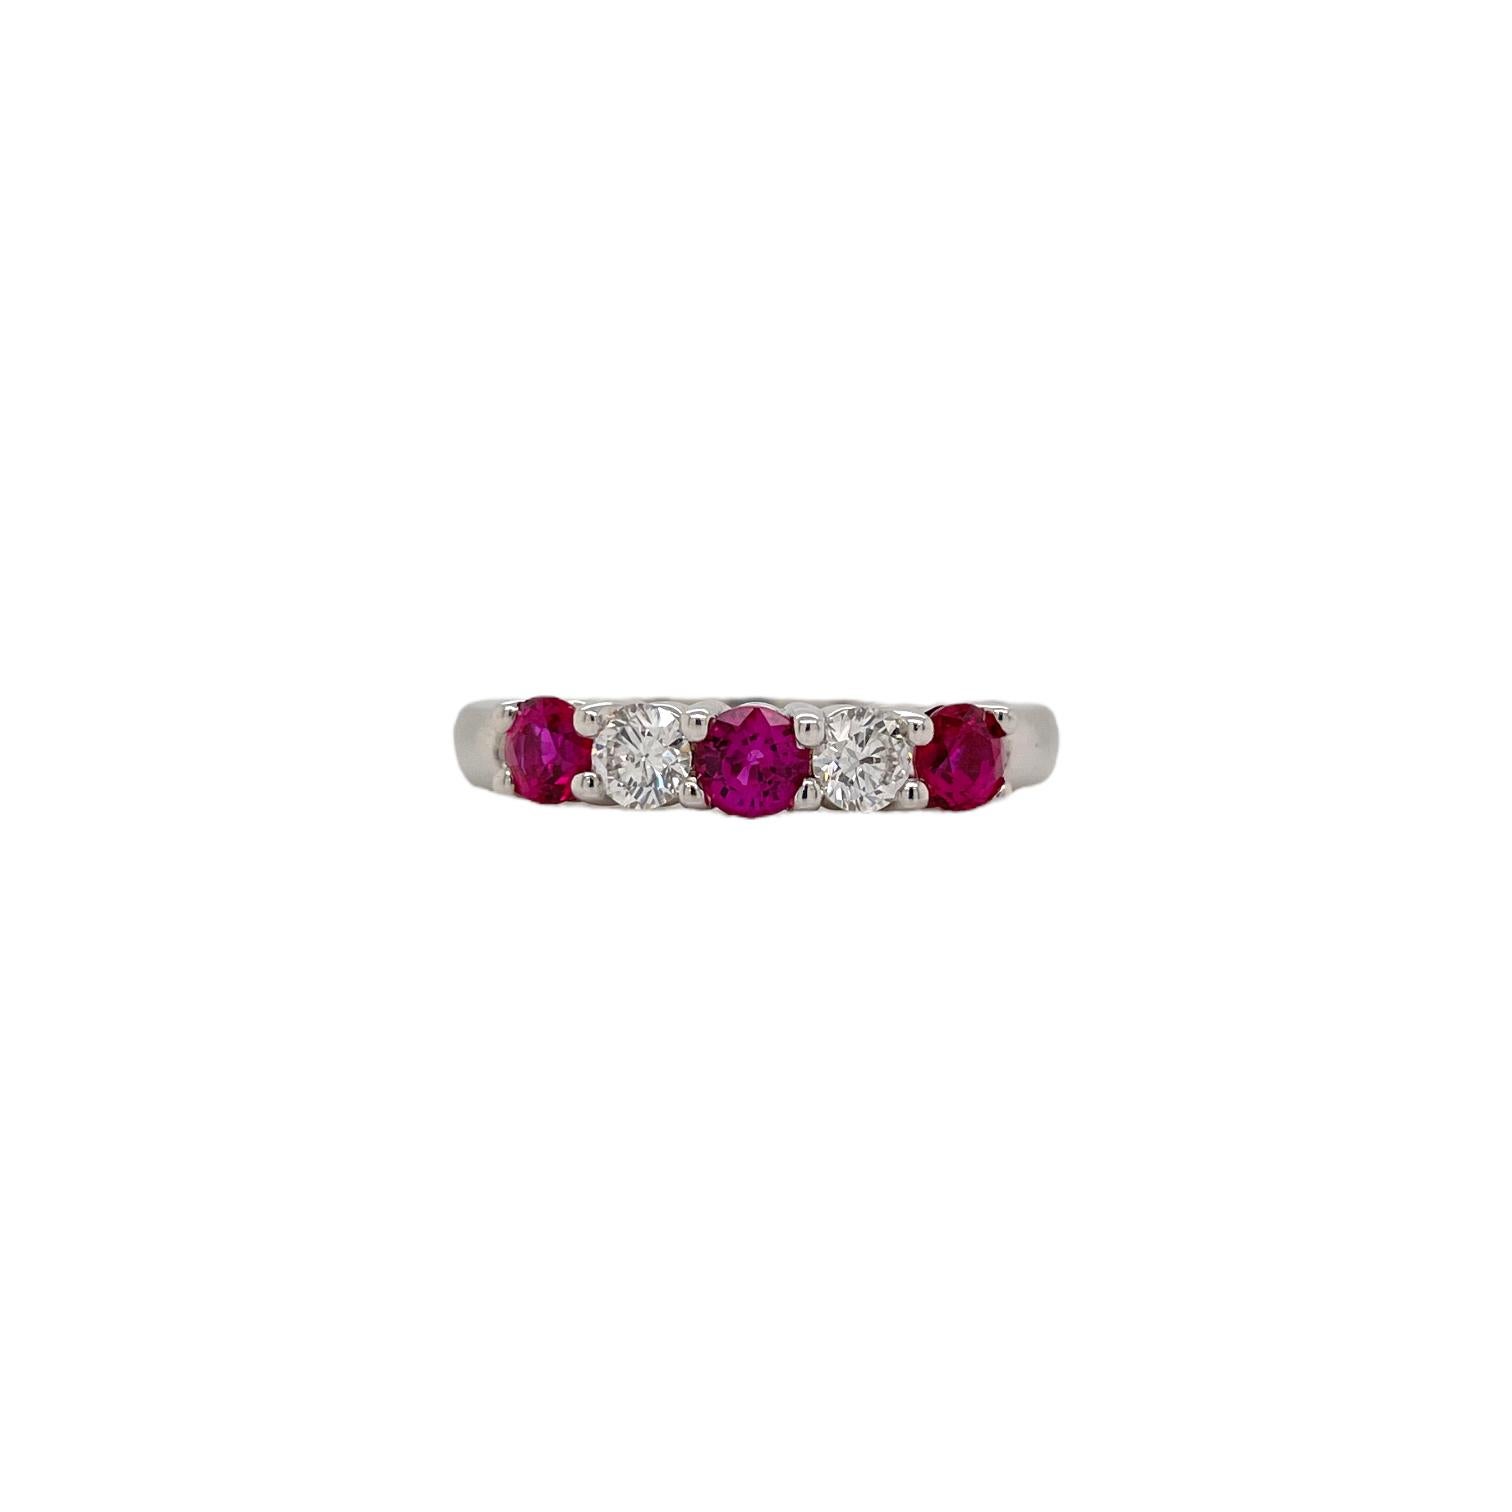 Ring contains alternating 3 round brilliant rubies, 0.70cts and 2 round brilliant diamonds, 0.28tcw. Diamonds are G in color and VS1 in clarity, excellent cut. All stones are mounted in prong settings. Ring is a size 6 and can be resized to desired